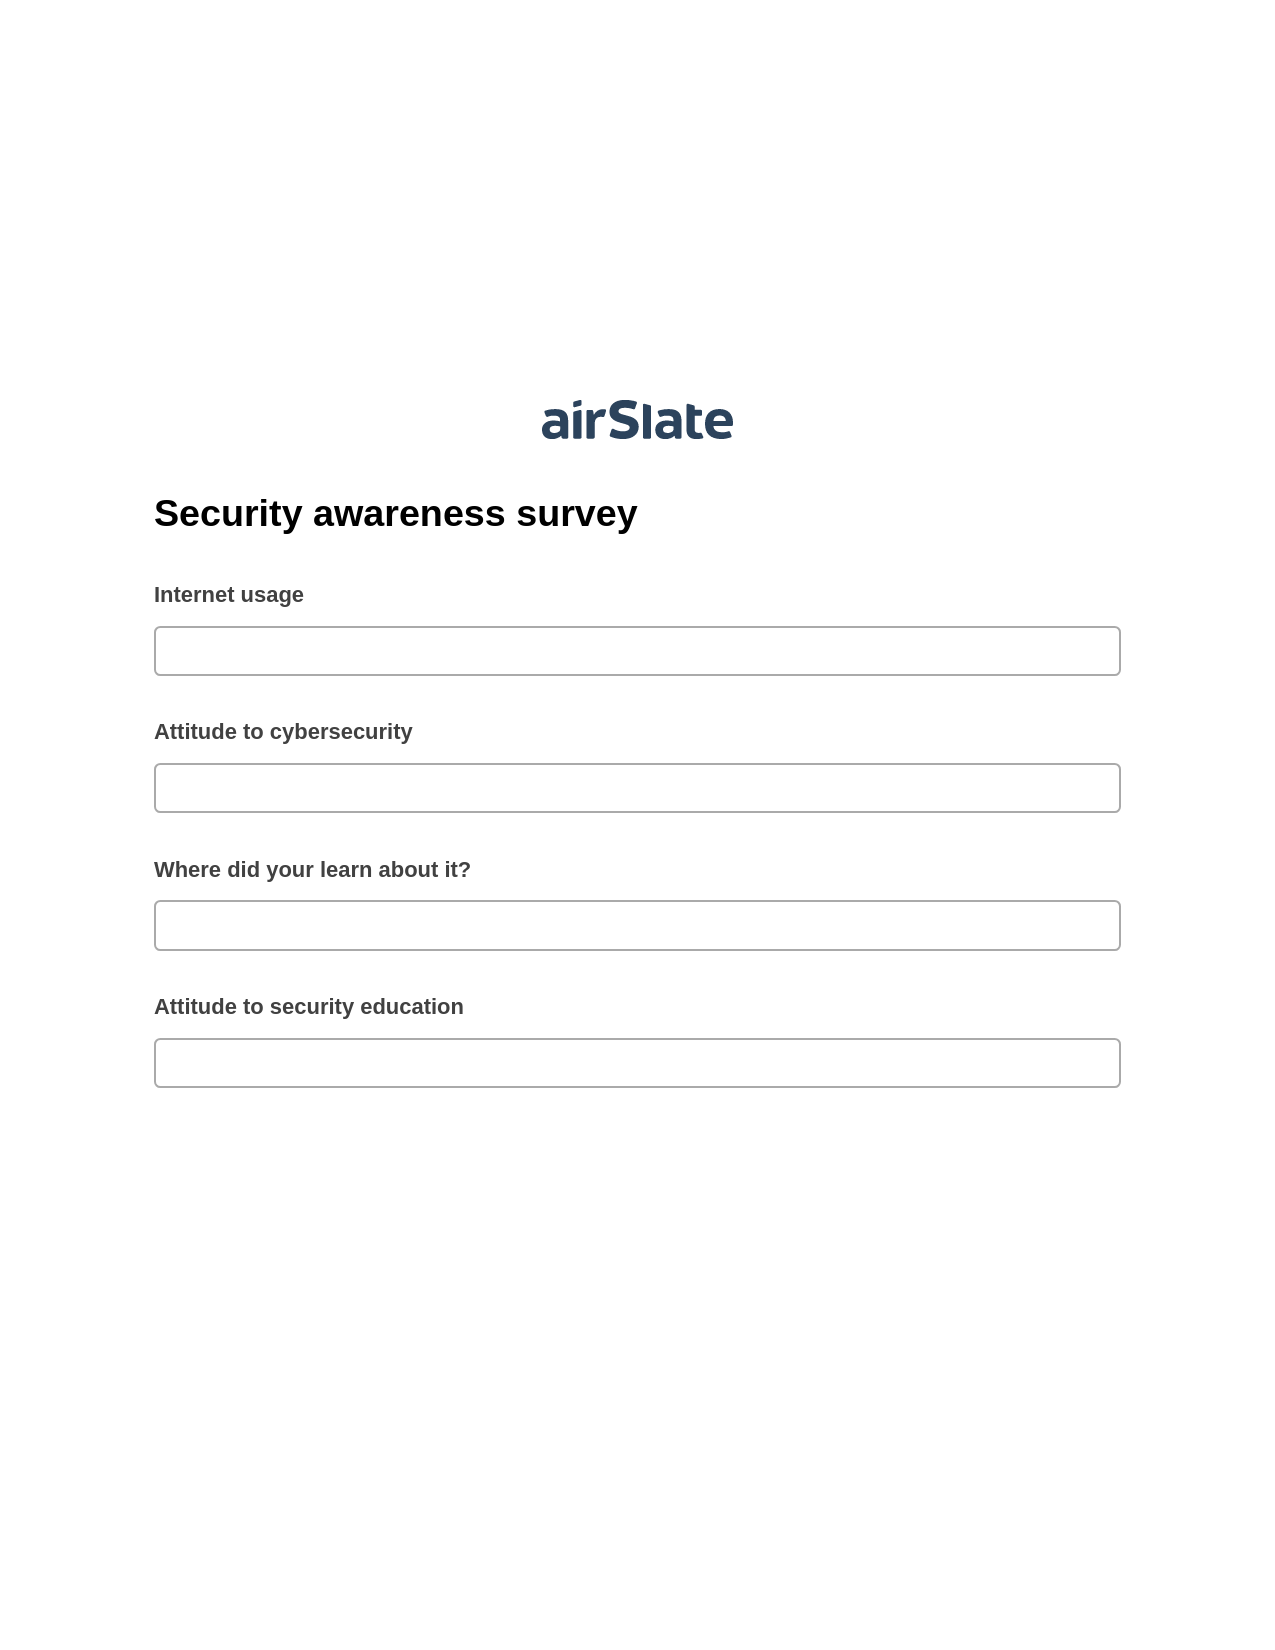 Security awareness survey Pre-fill from MySQL Dropdown Options Bot, Export to MS Dynamics 365 Bot, Export to Salesforce Bot